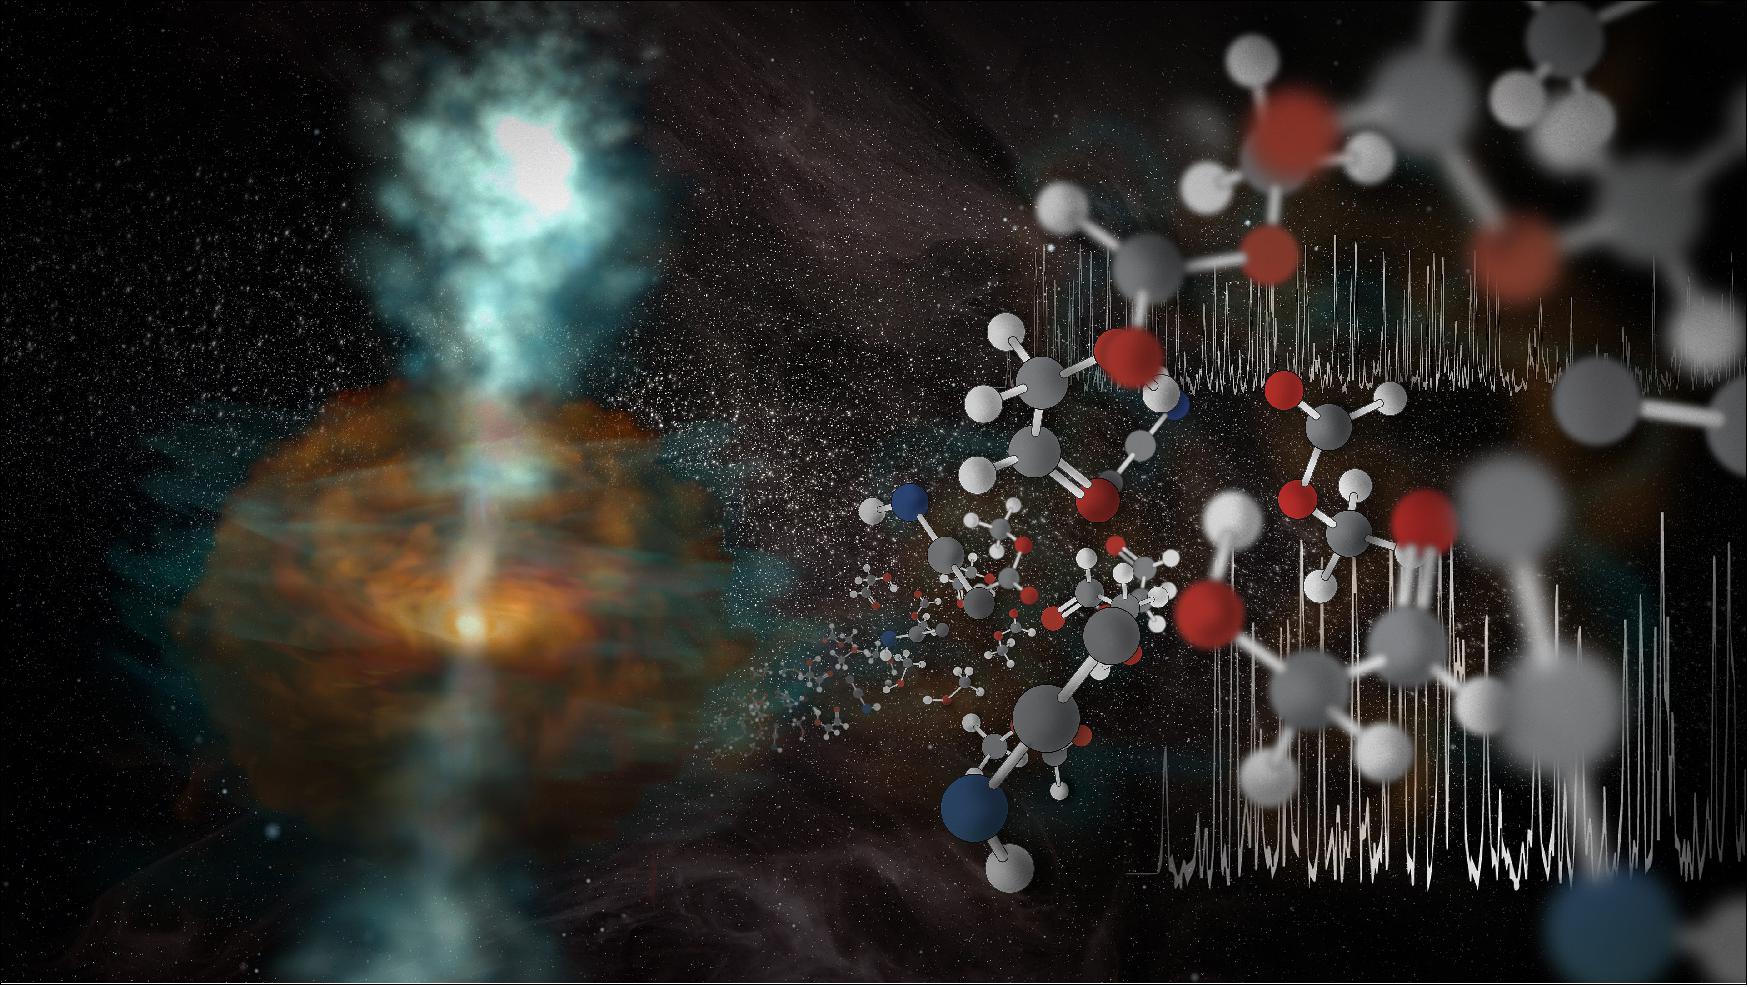 Figure 56: Illustration highlighting ALMA's high-frequency observing capabilities (image credit: NRAO/AUI/NSF, S. Dagnello)